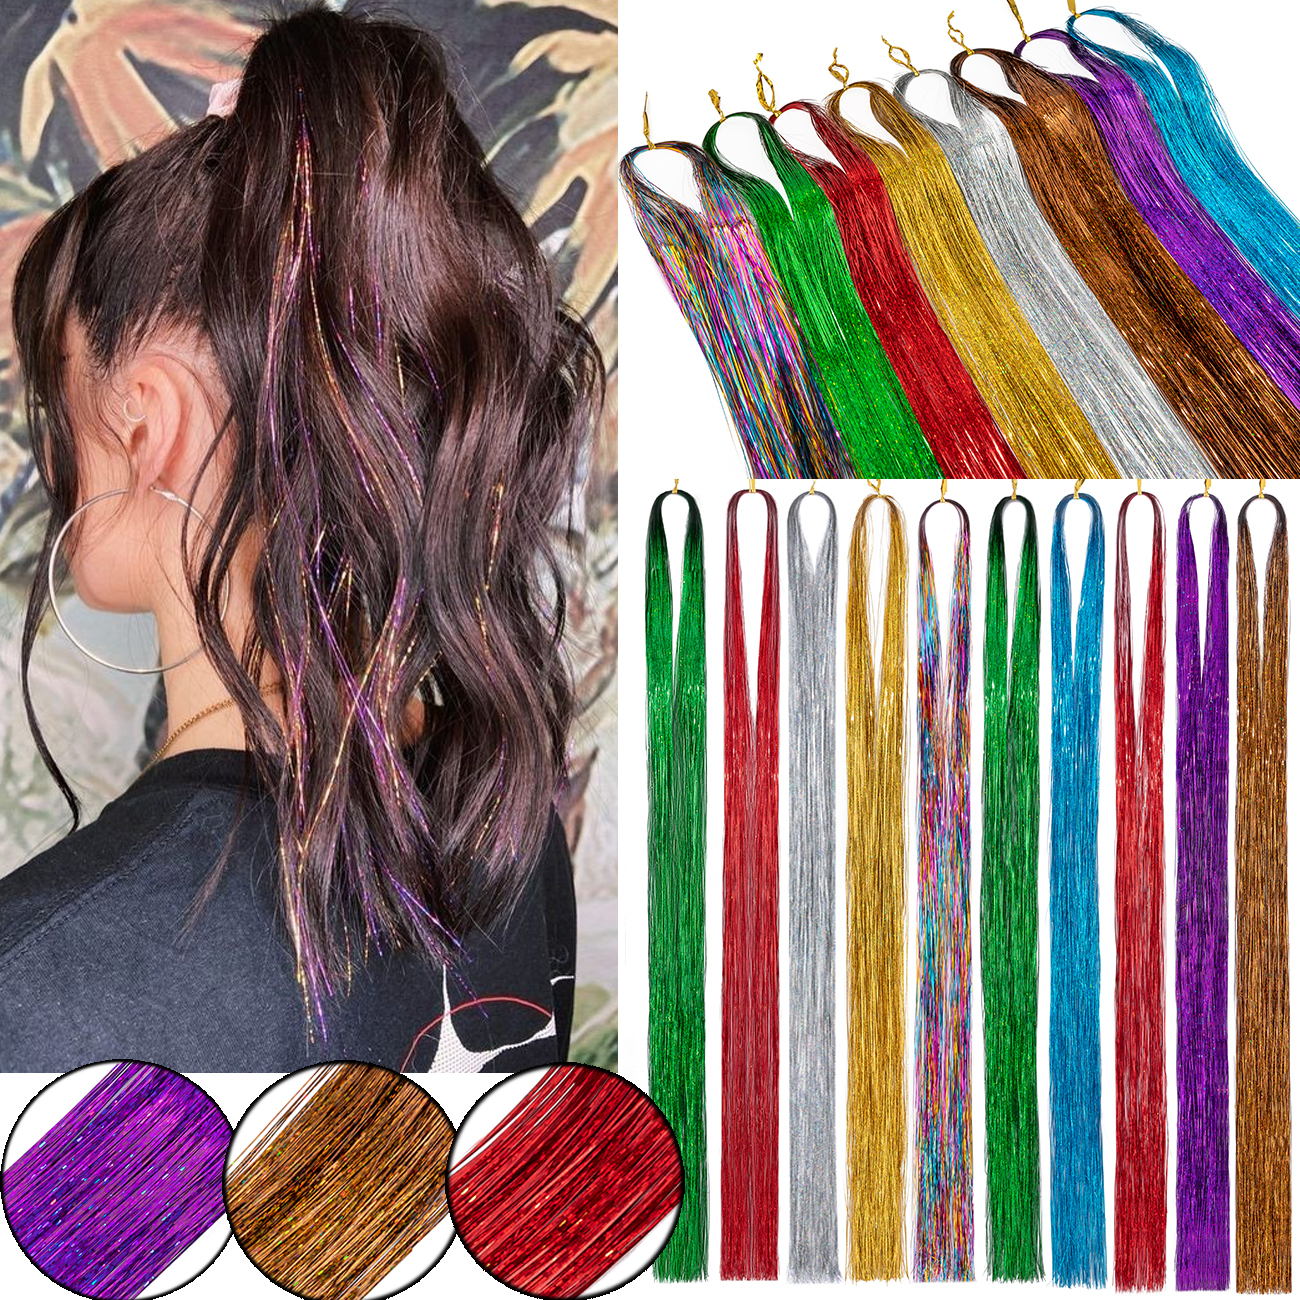 Benehair Hair Tinsel 48 400 Strands Sparkling Party Tinsel Hair Extensions  Highlights Multi-Colors Synthetic Hair Streak Bling